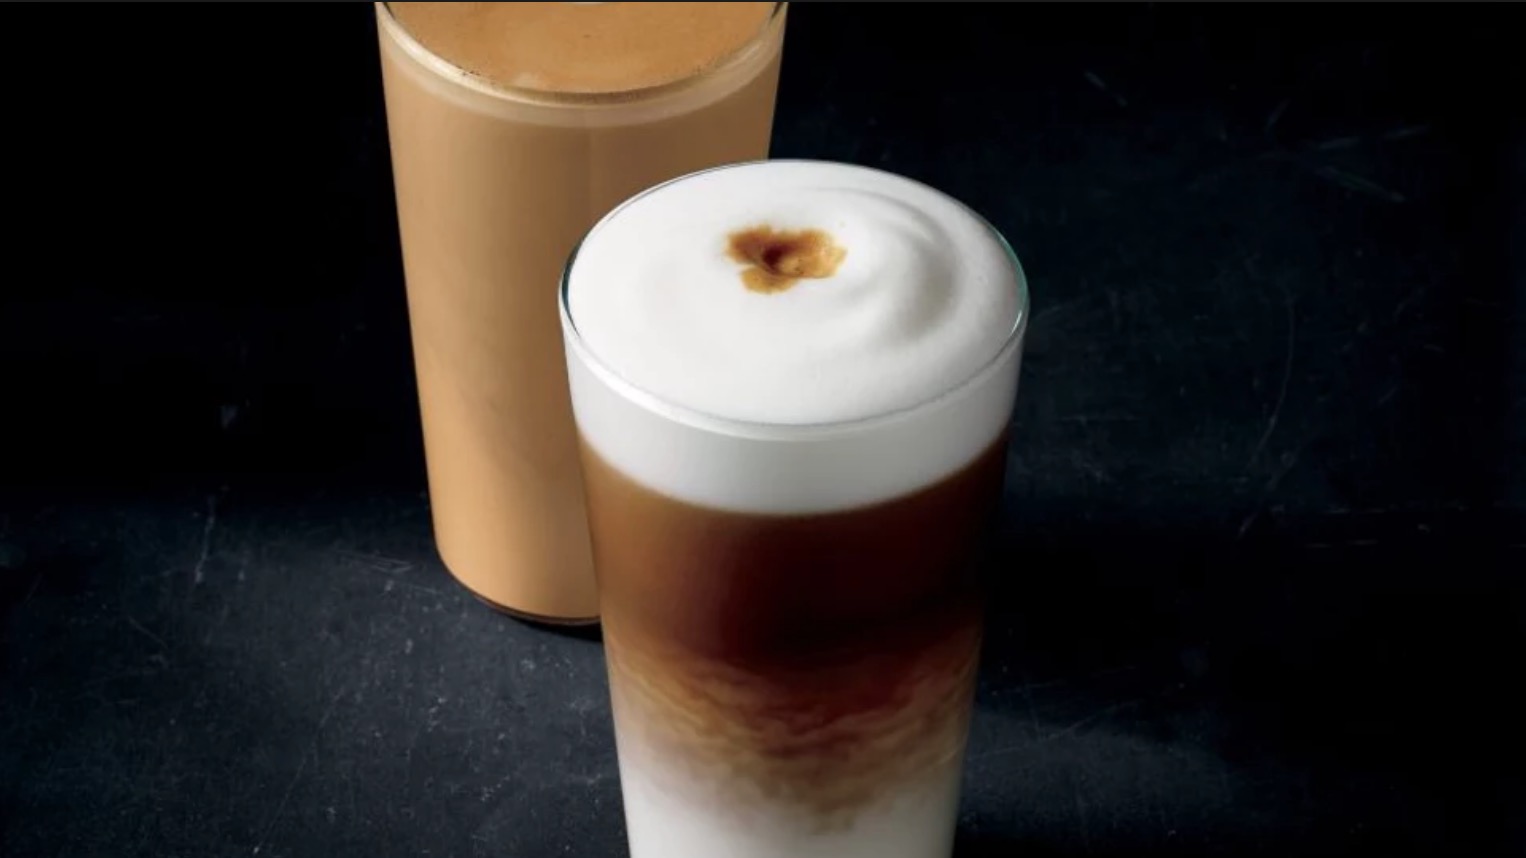 Difference between a Latte Macchiato and a Café Latte